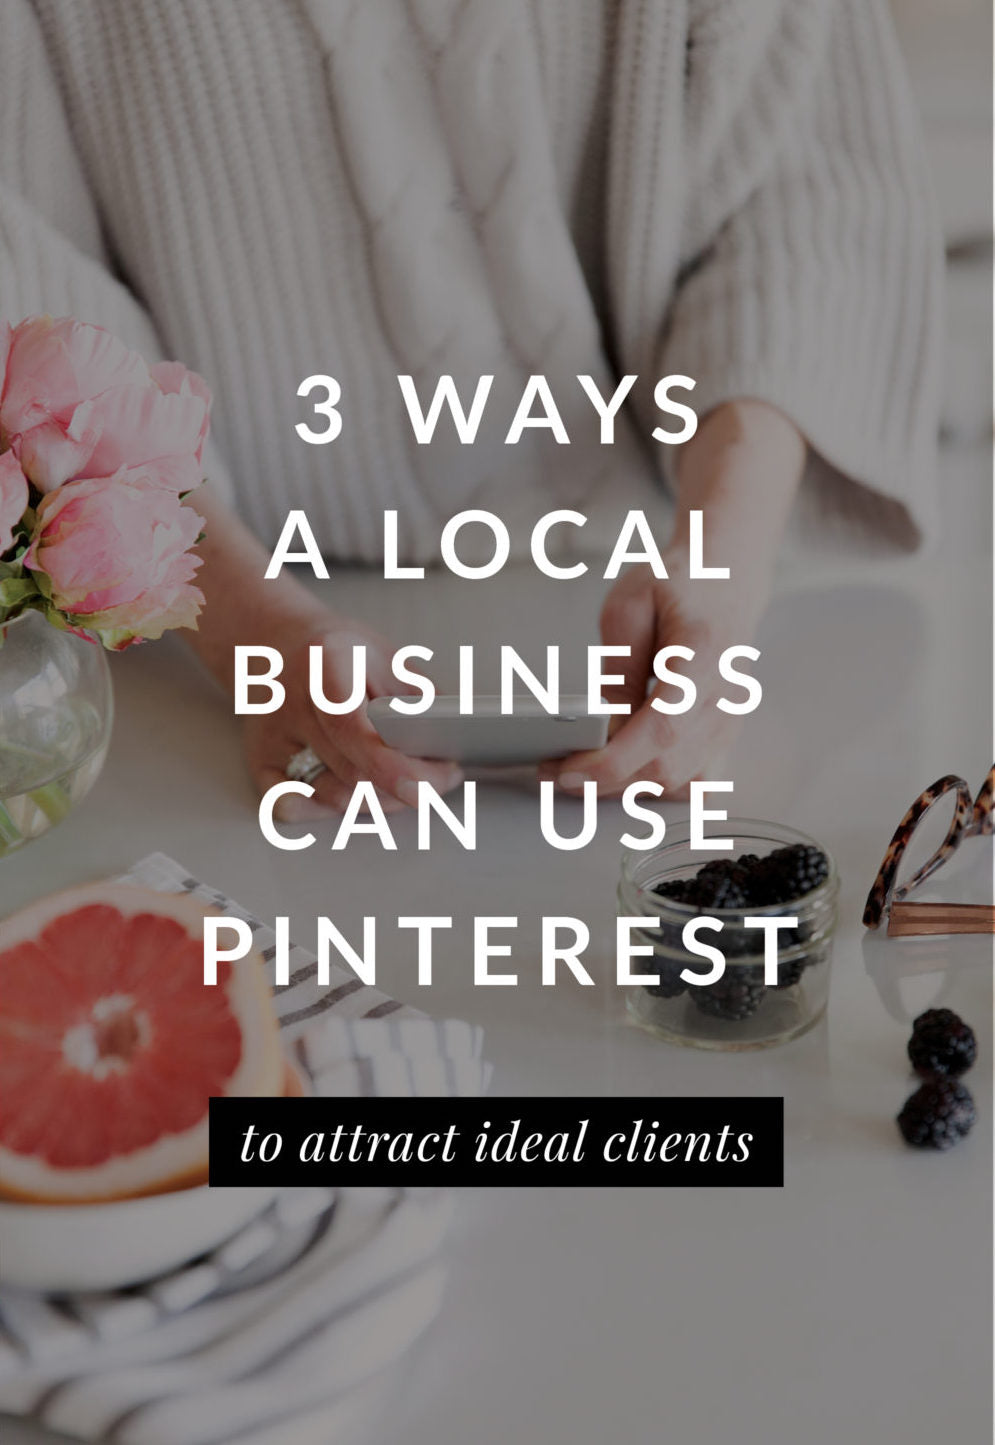 Pinterest for Local business